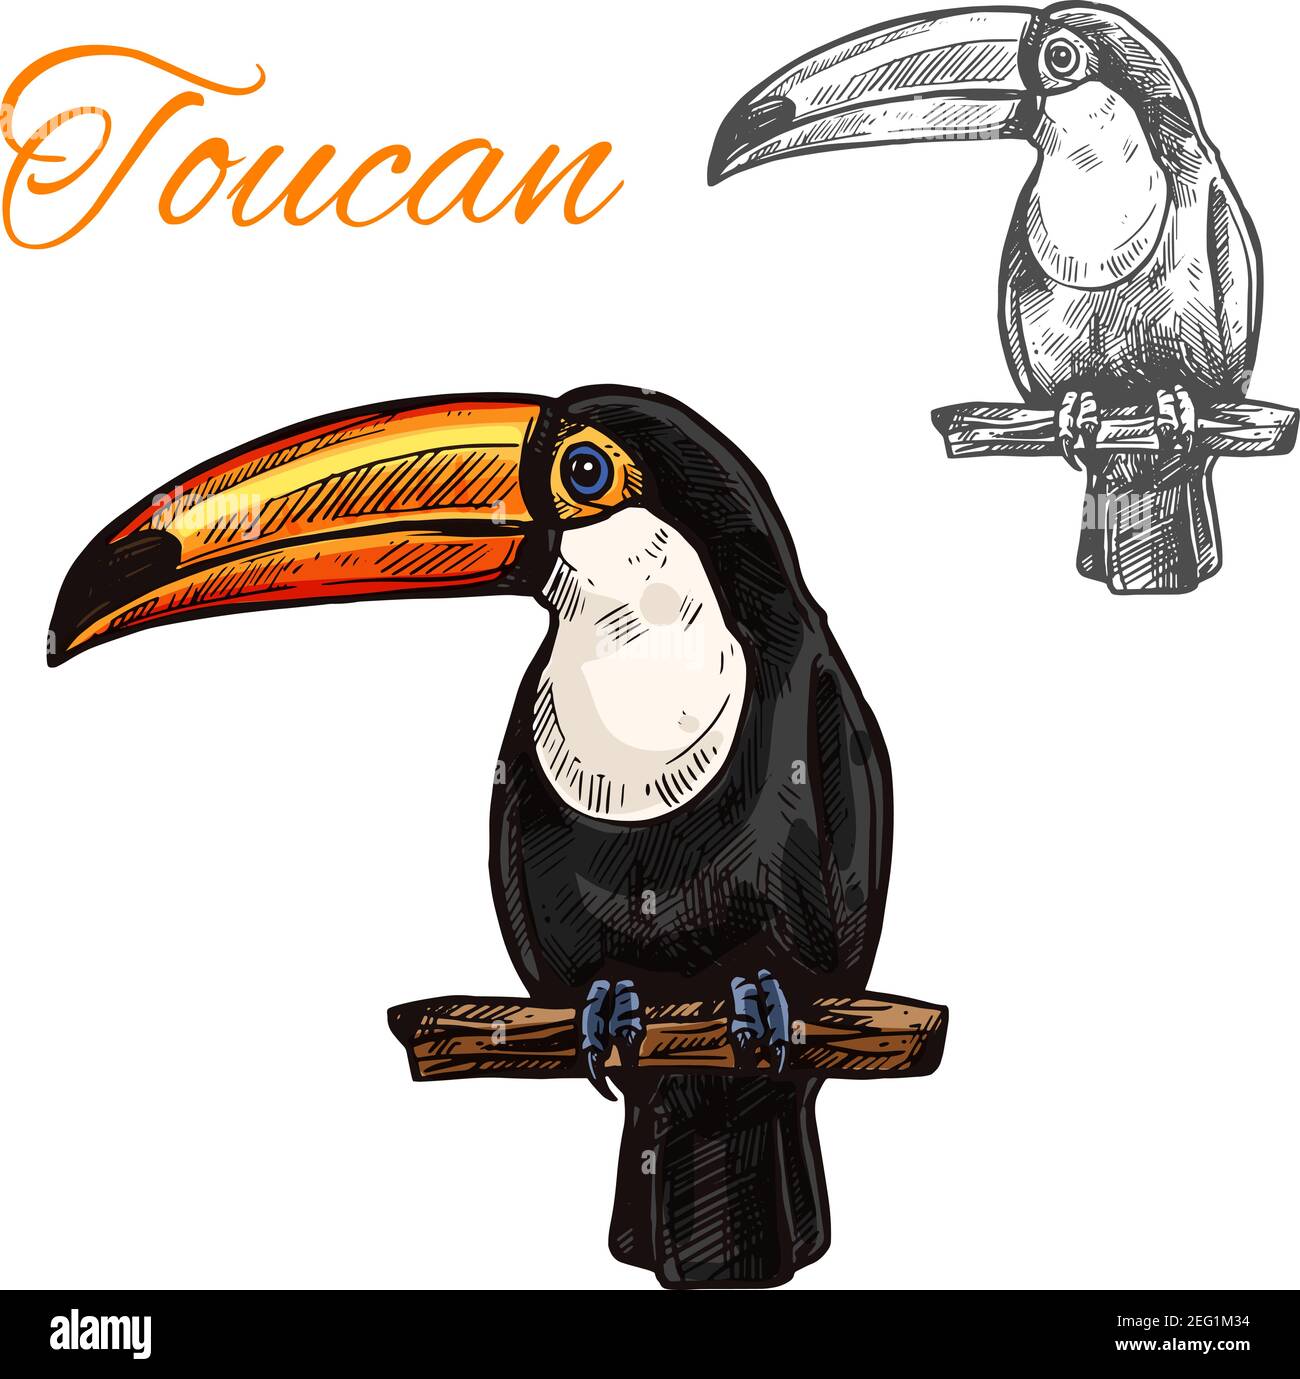 Toucan sketch with bird of South American tropical jungle. Exotic toco toucan with black plumage, white chest and yellow beak sitting on branch icon f Stock Vector